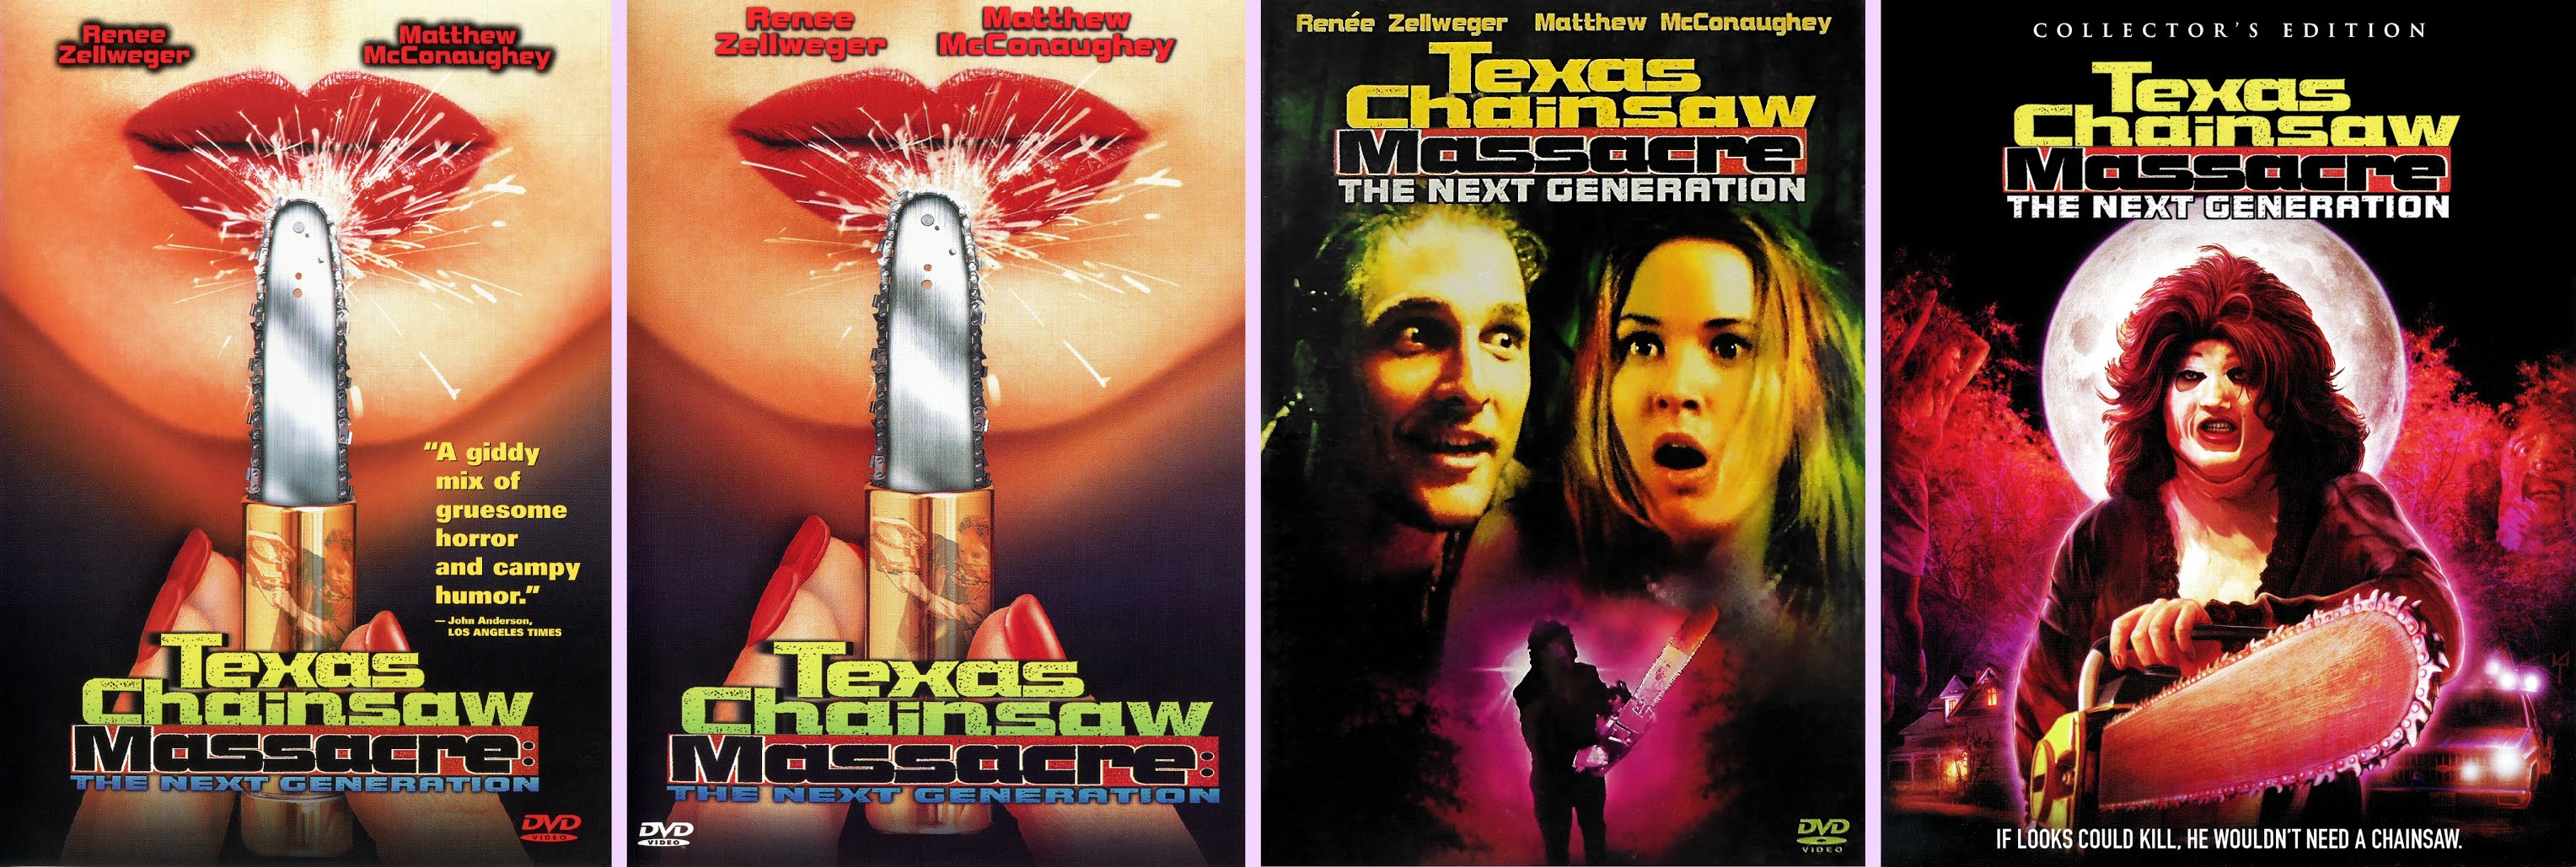 DVD Exotica: The Return Of the Texas Chainsaw Massacre 4: The Next  Generation (DVD/ Blu-ray Comparison)